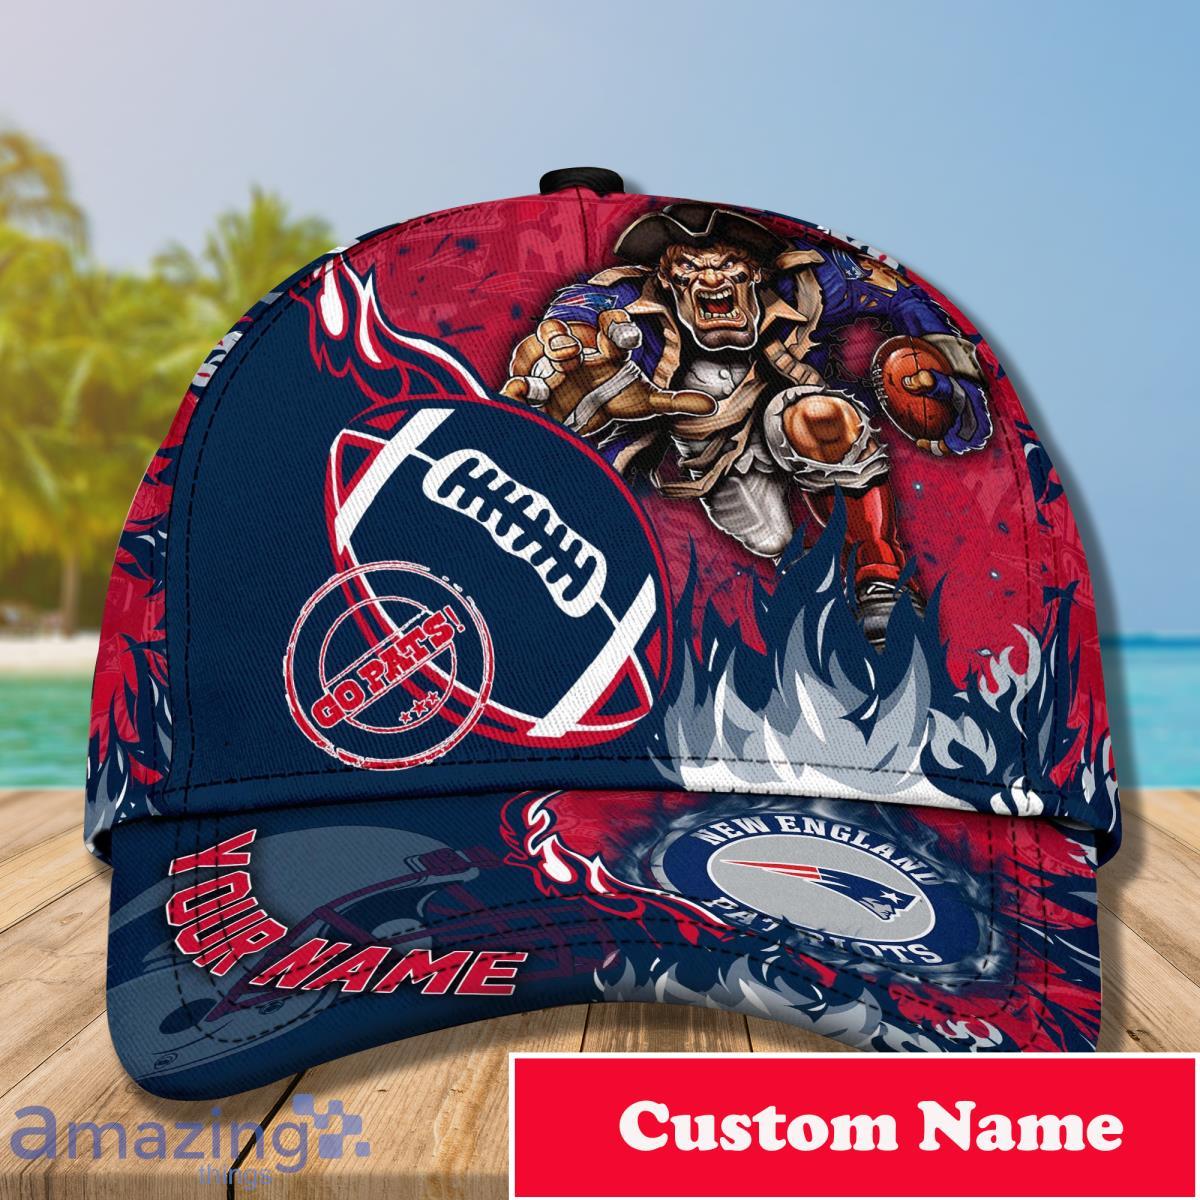 New England Patriots NFLCustom Name Cap Style Gift For Men And